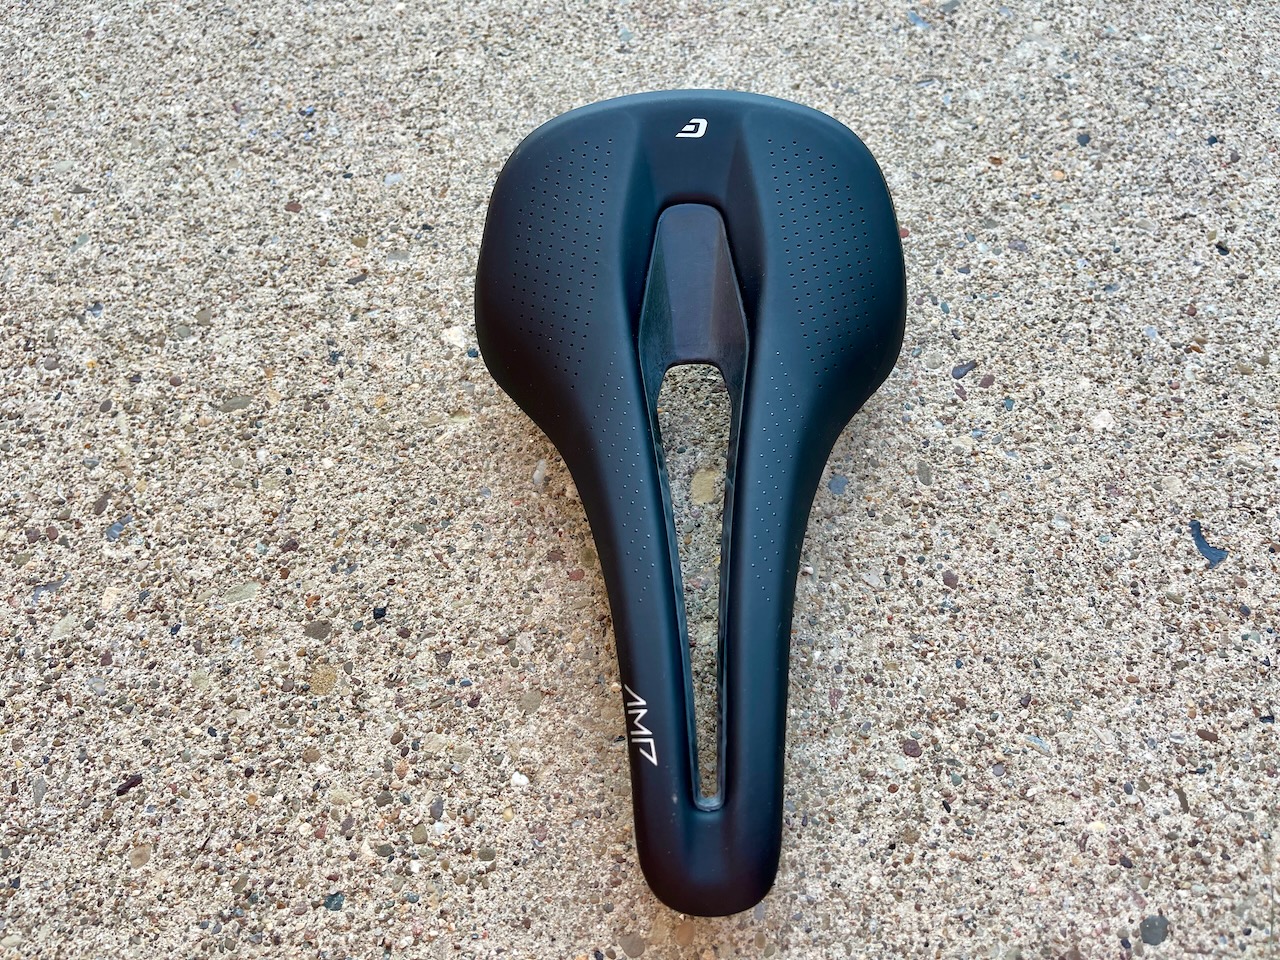 CADEX Amp saddle review long view